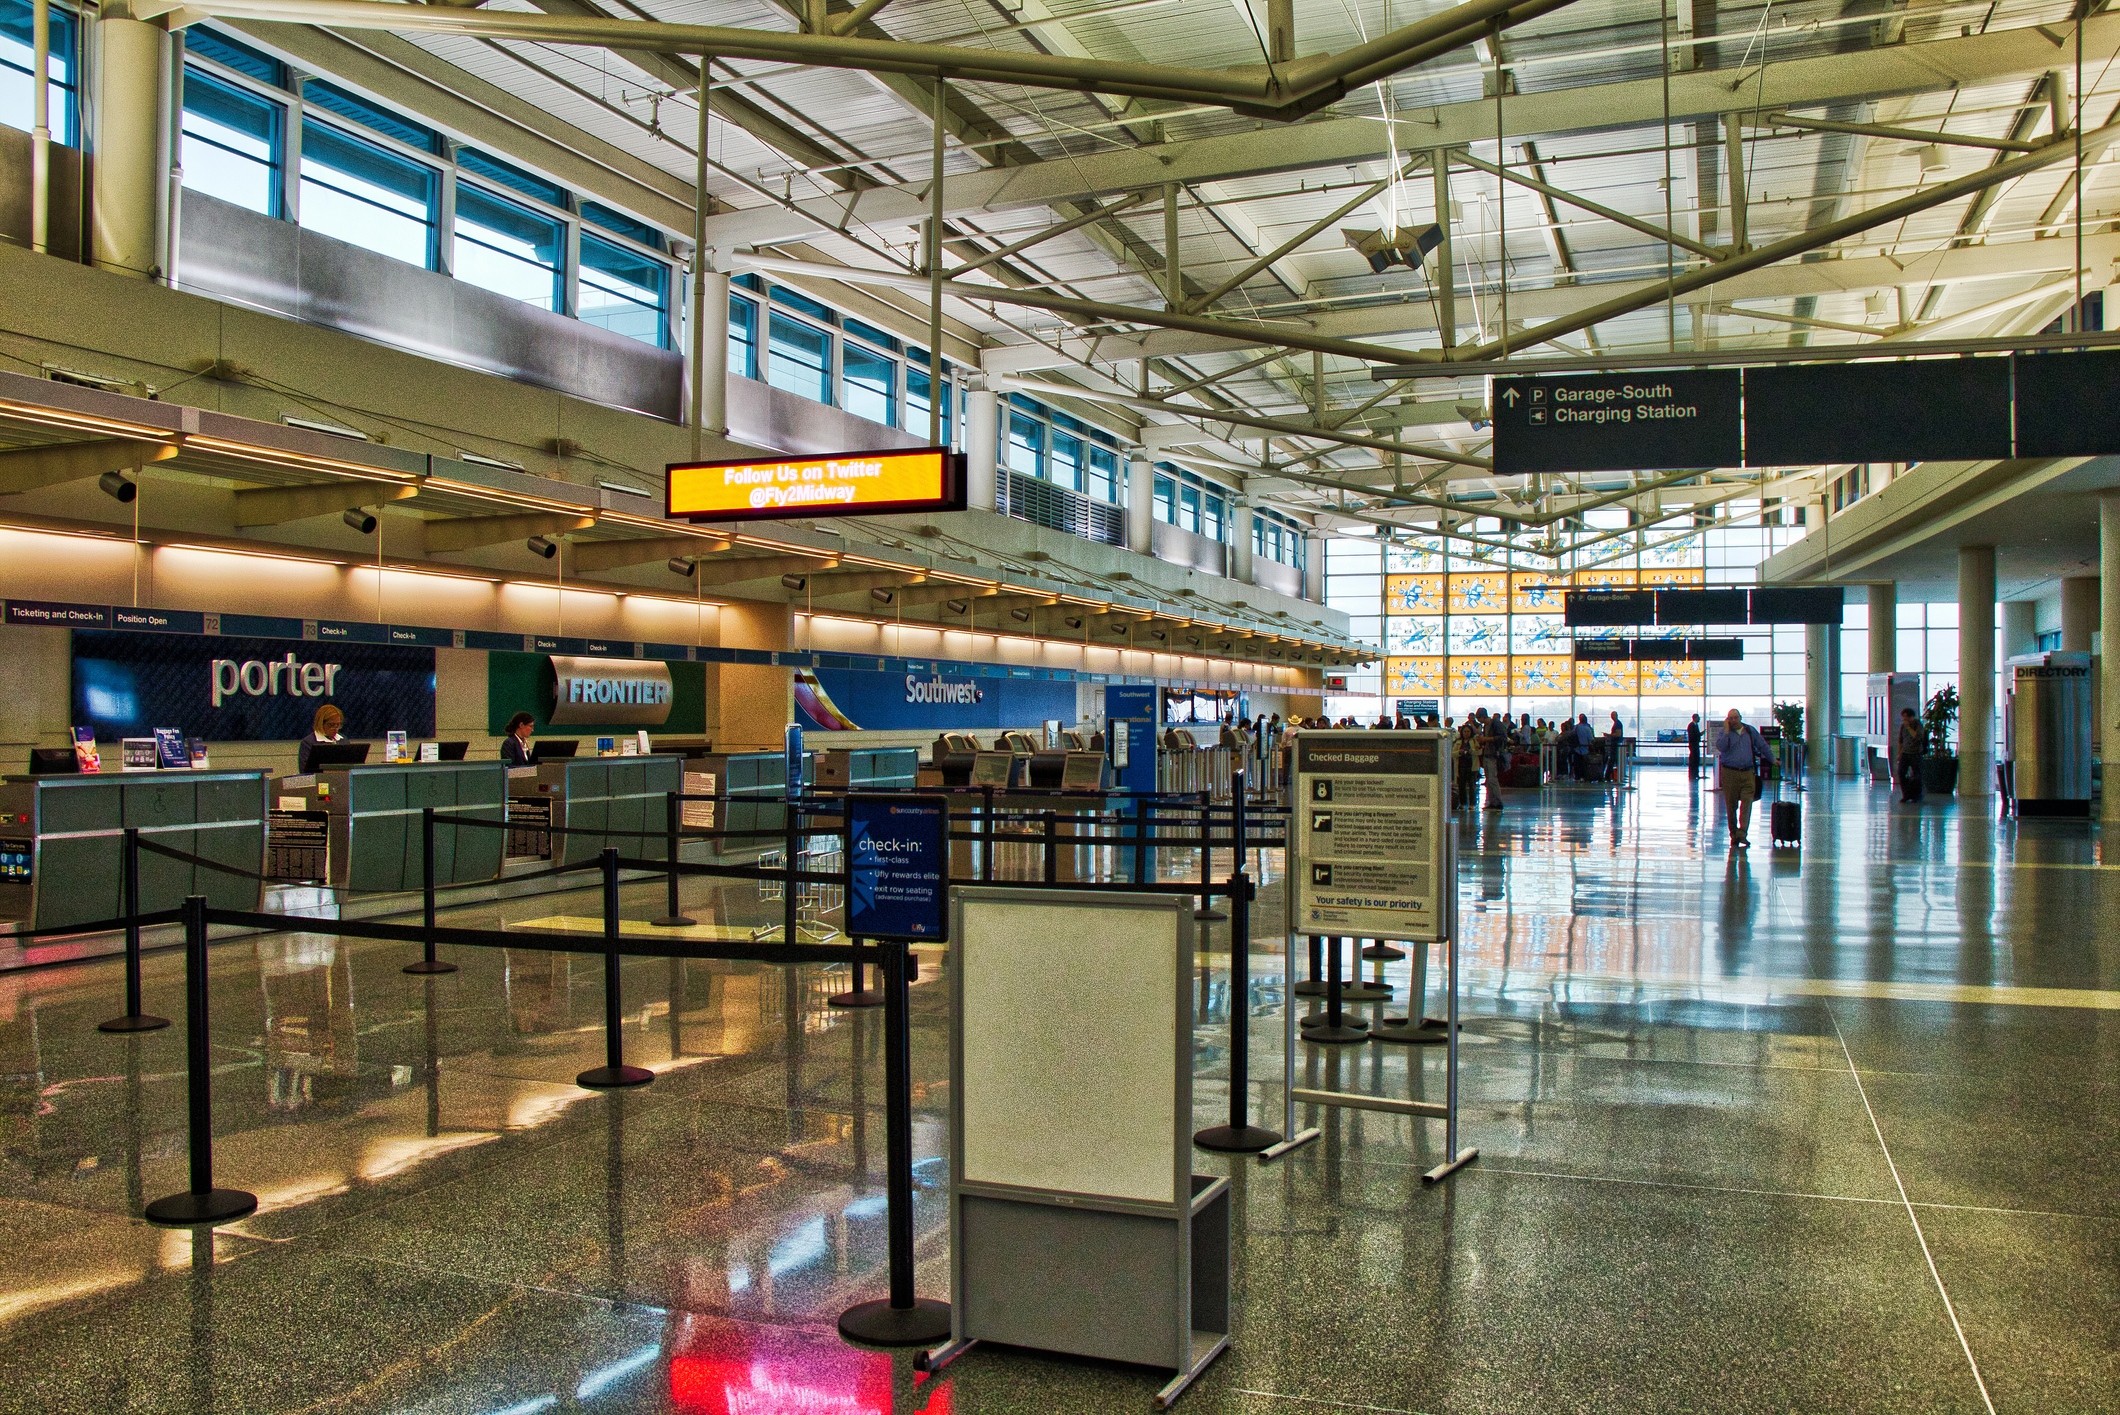 This is Chicago – Chicago Midway International Airport (MDW) check-in Kiosk